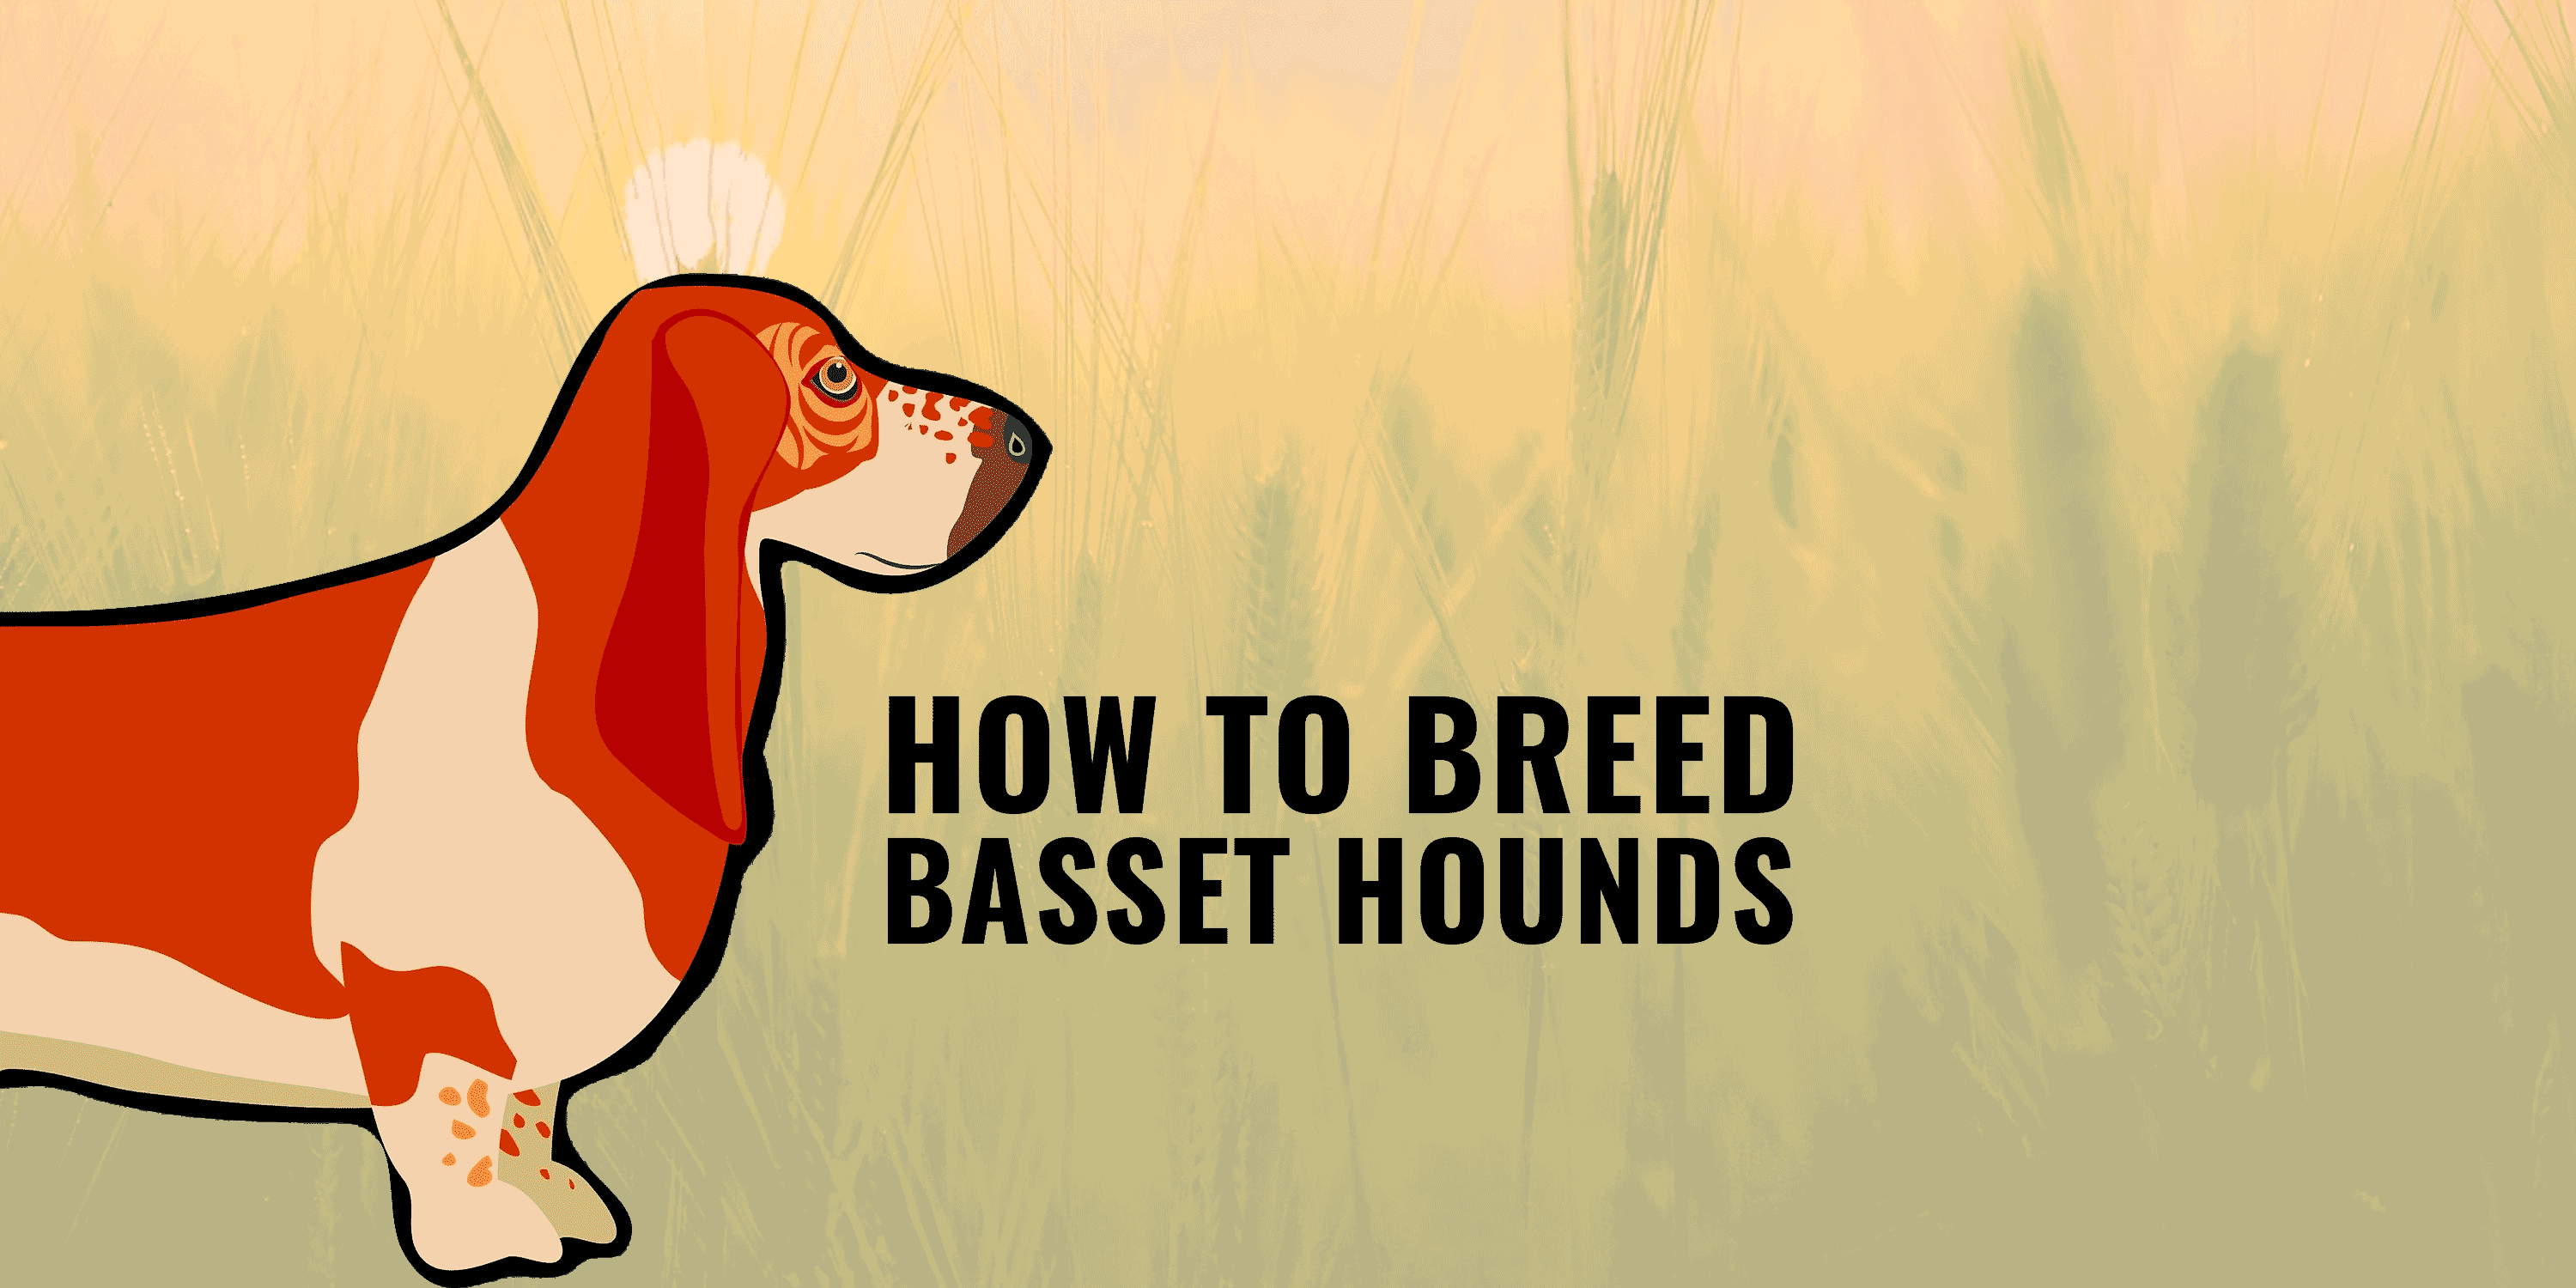 How To Breed Basset Hounds